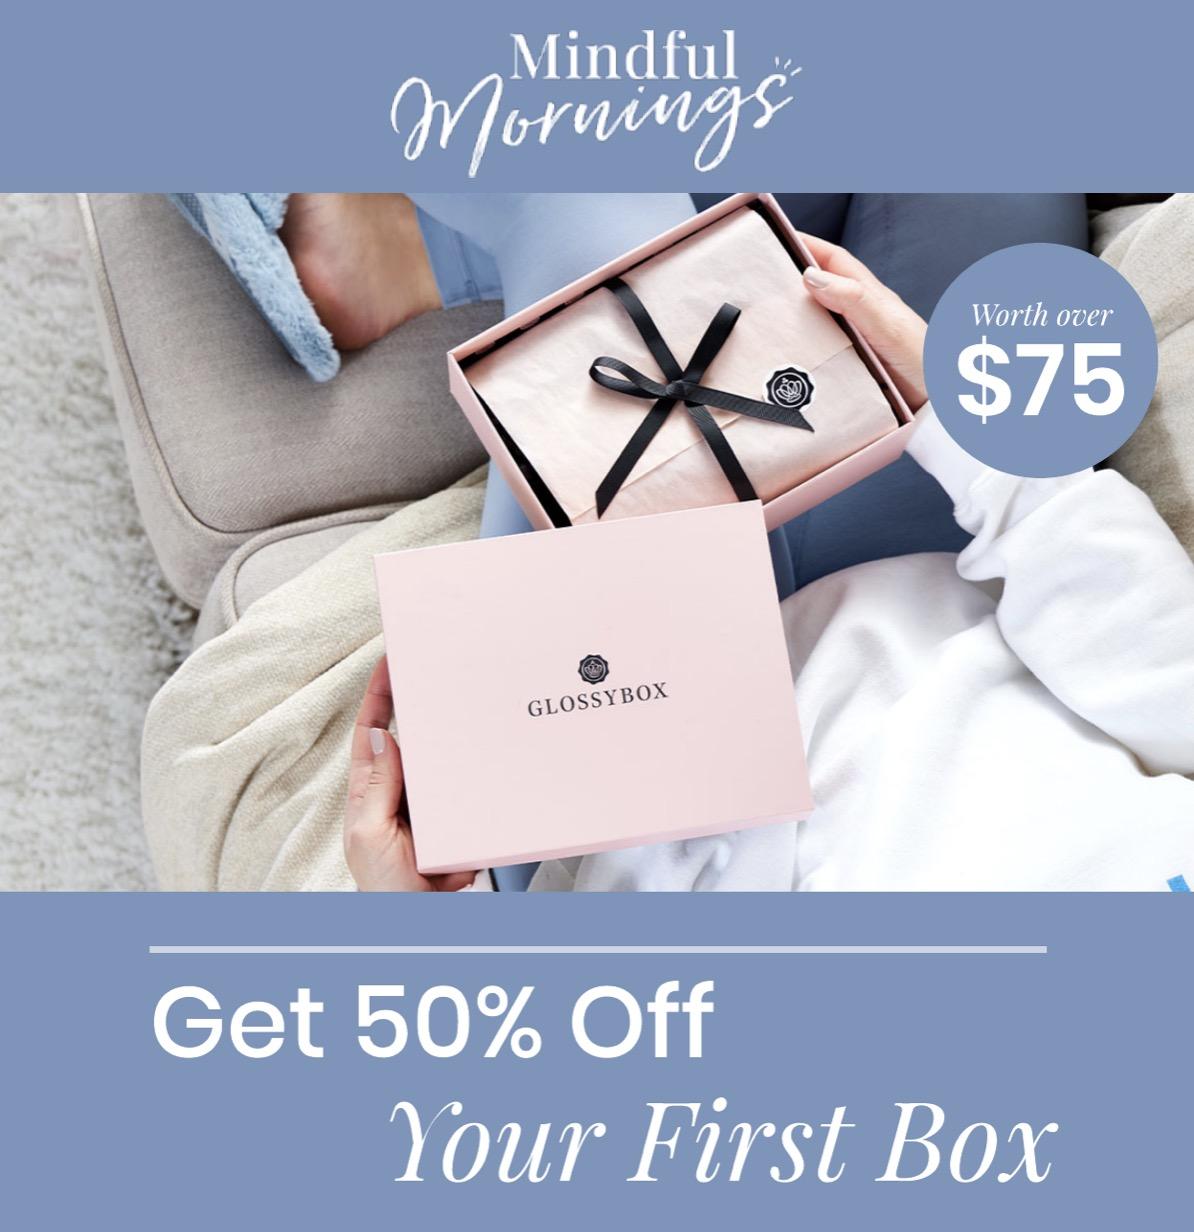 GLOSSYBOX Coupon Code – Save 50% Off Your First Box